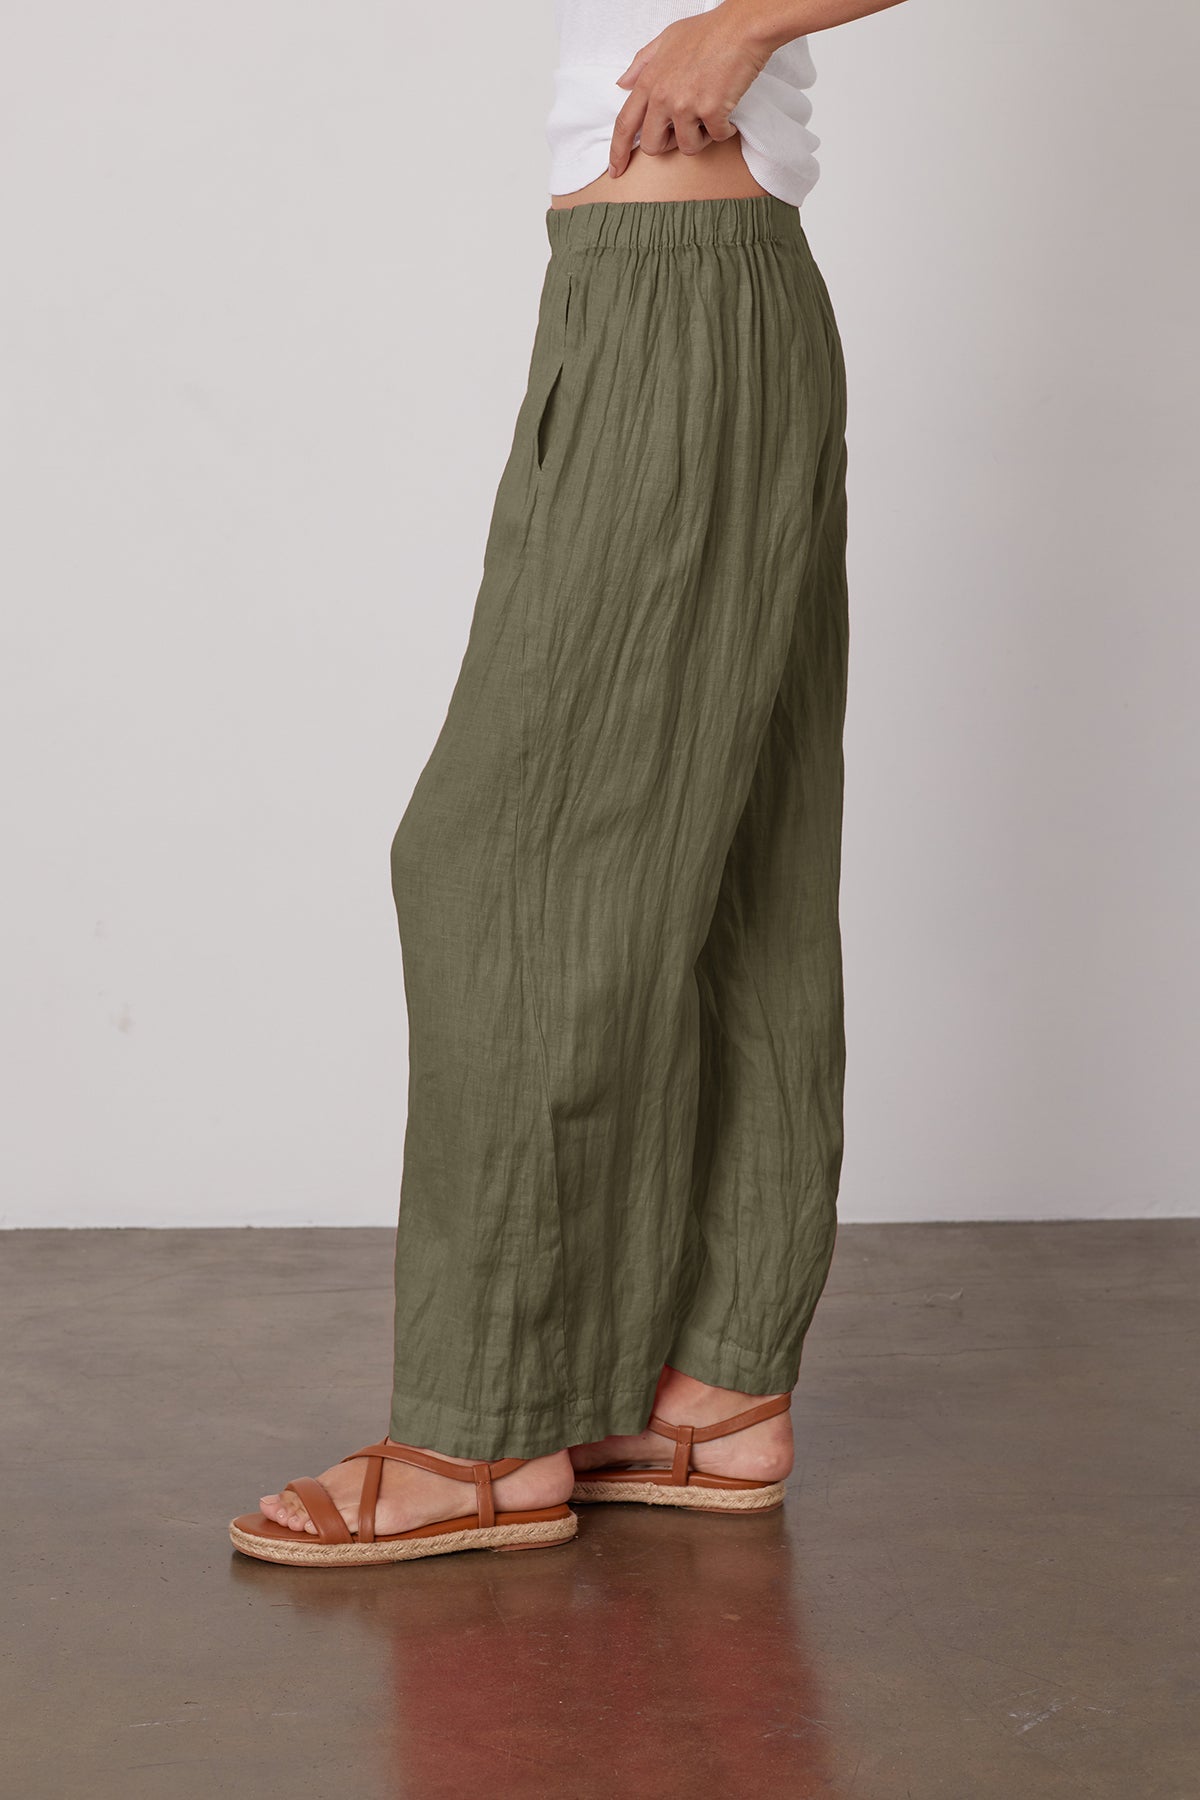 Lola linen pant in olive green side.-25329015652545